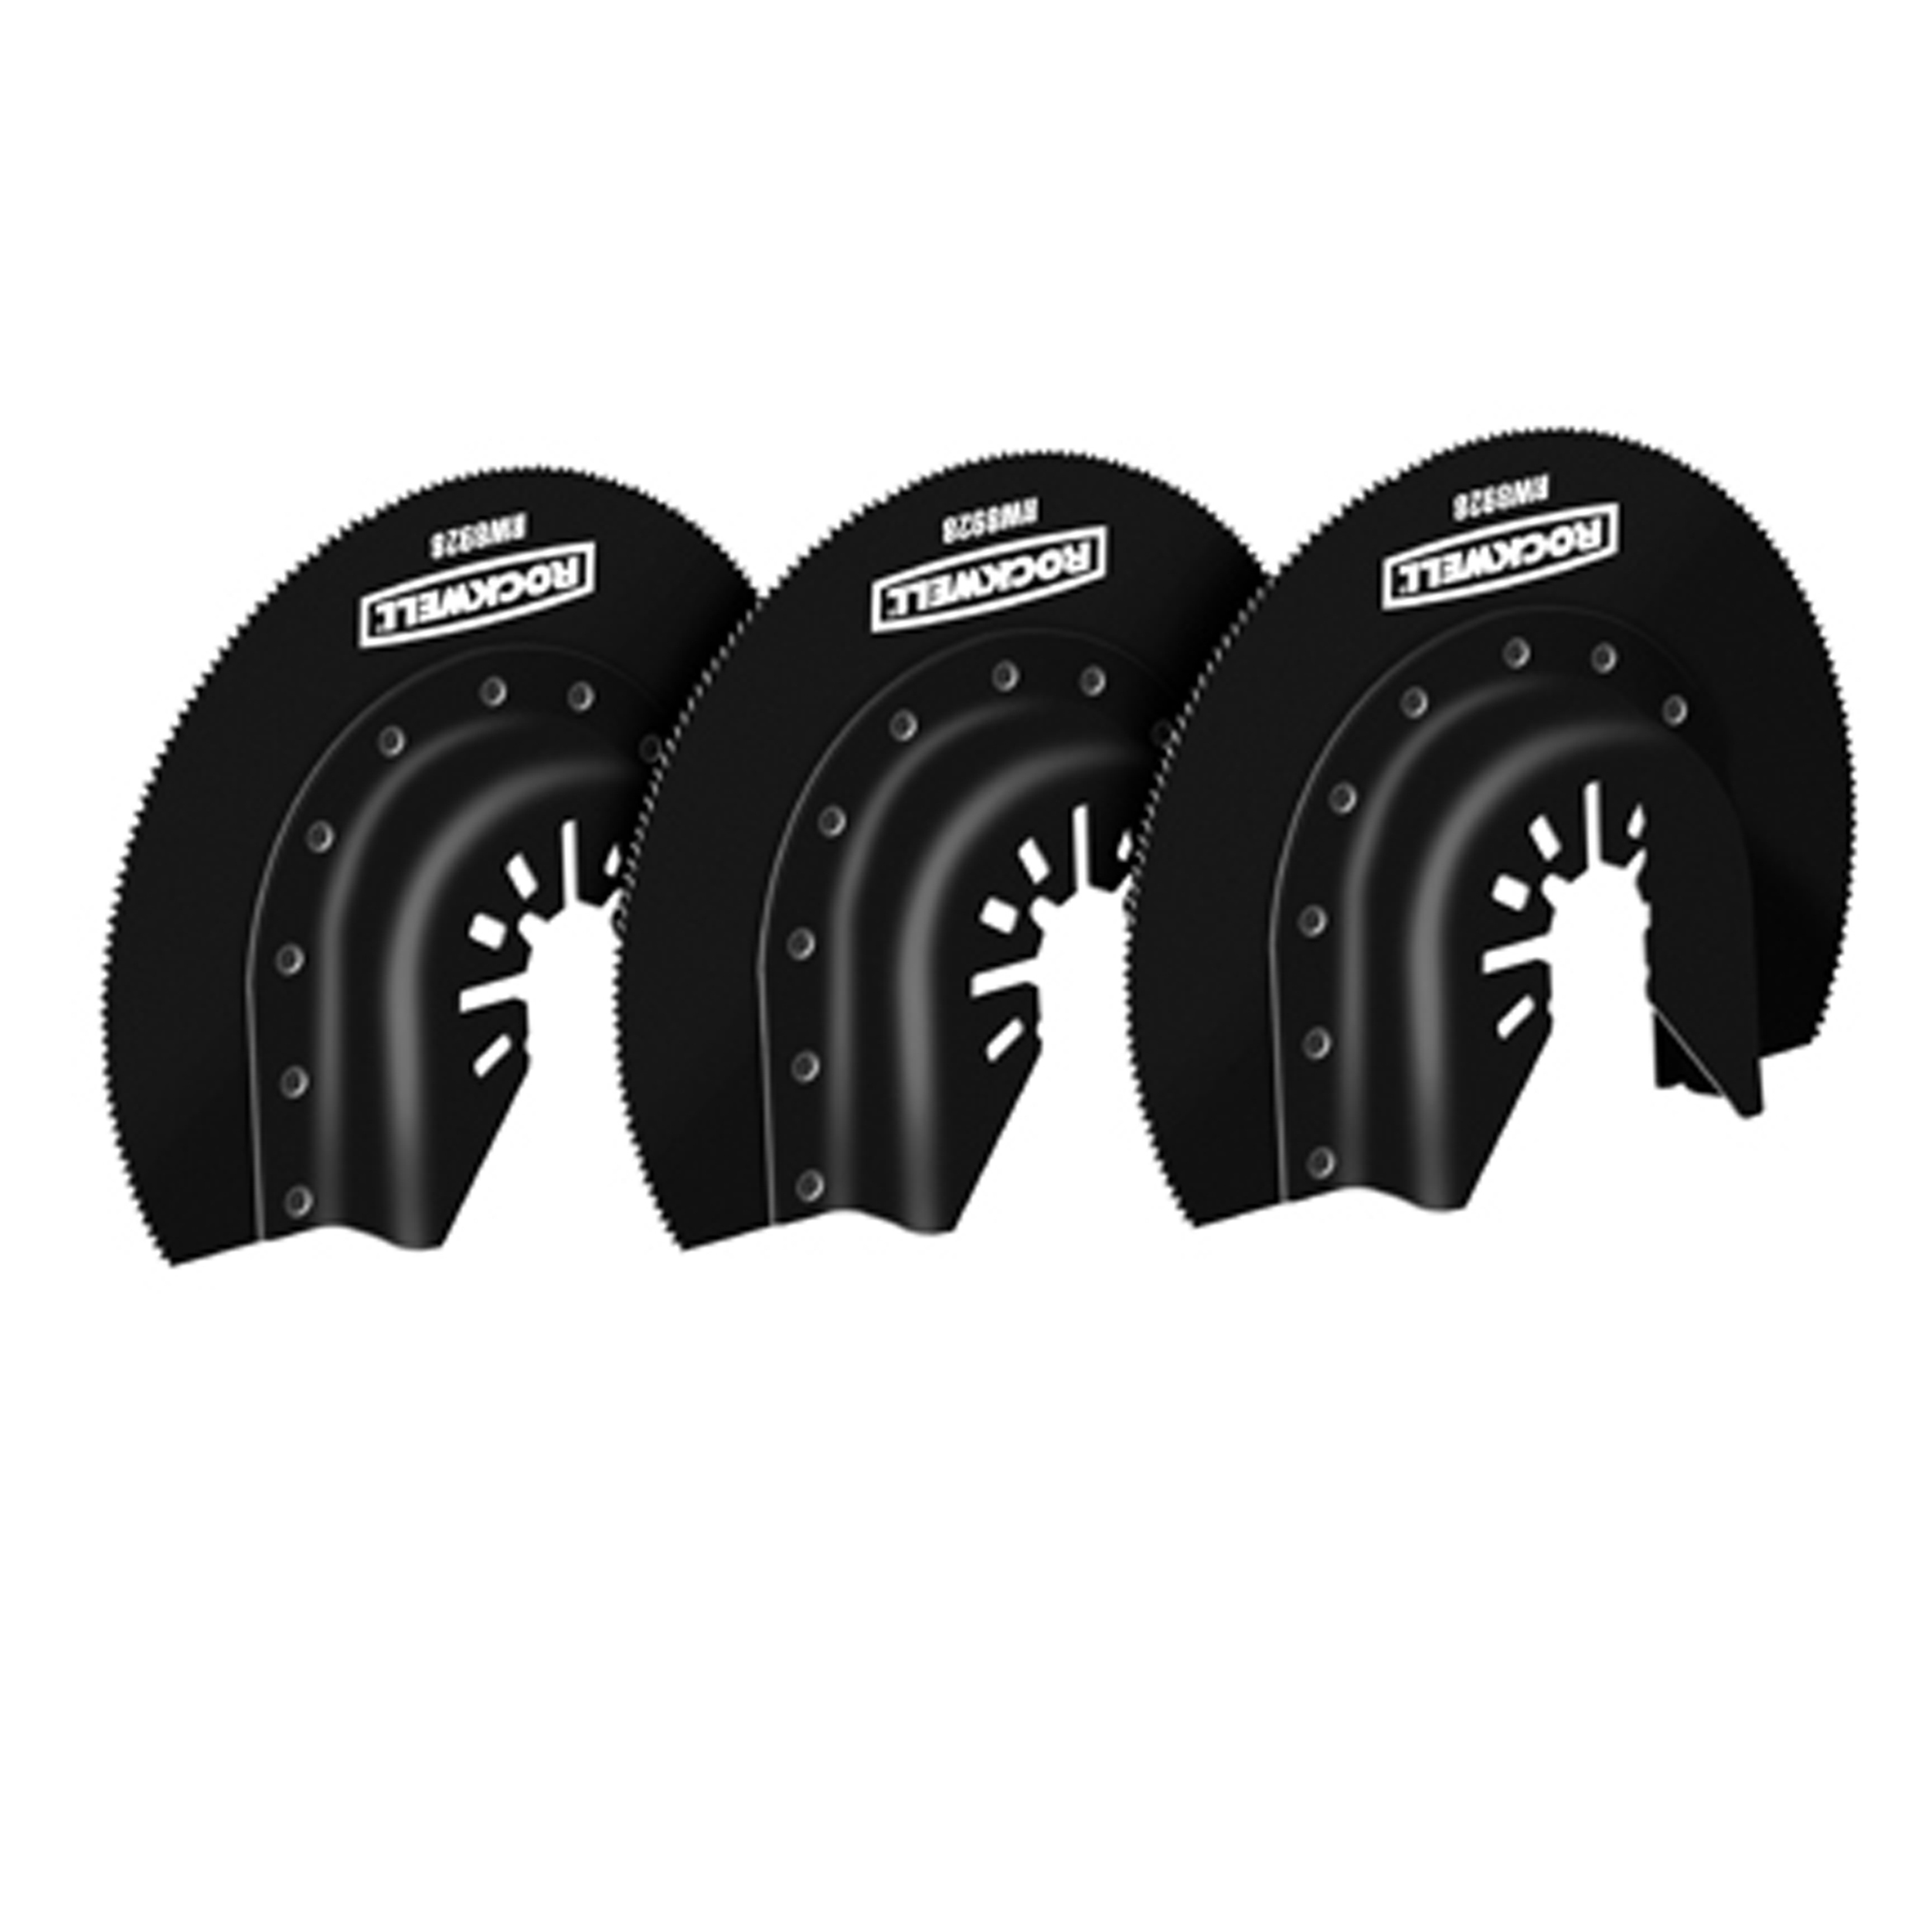 Sonicrafter 3-1/8" Hss Semicircle Saw Blade, 3 Pack